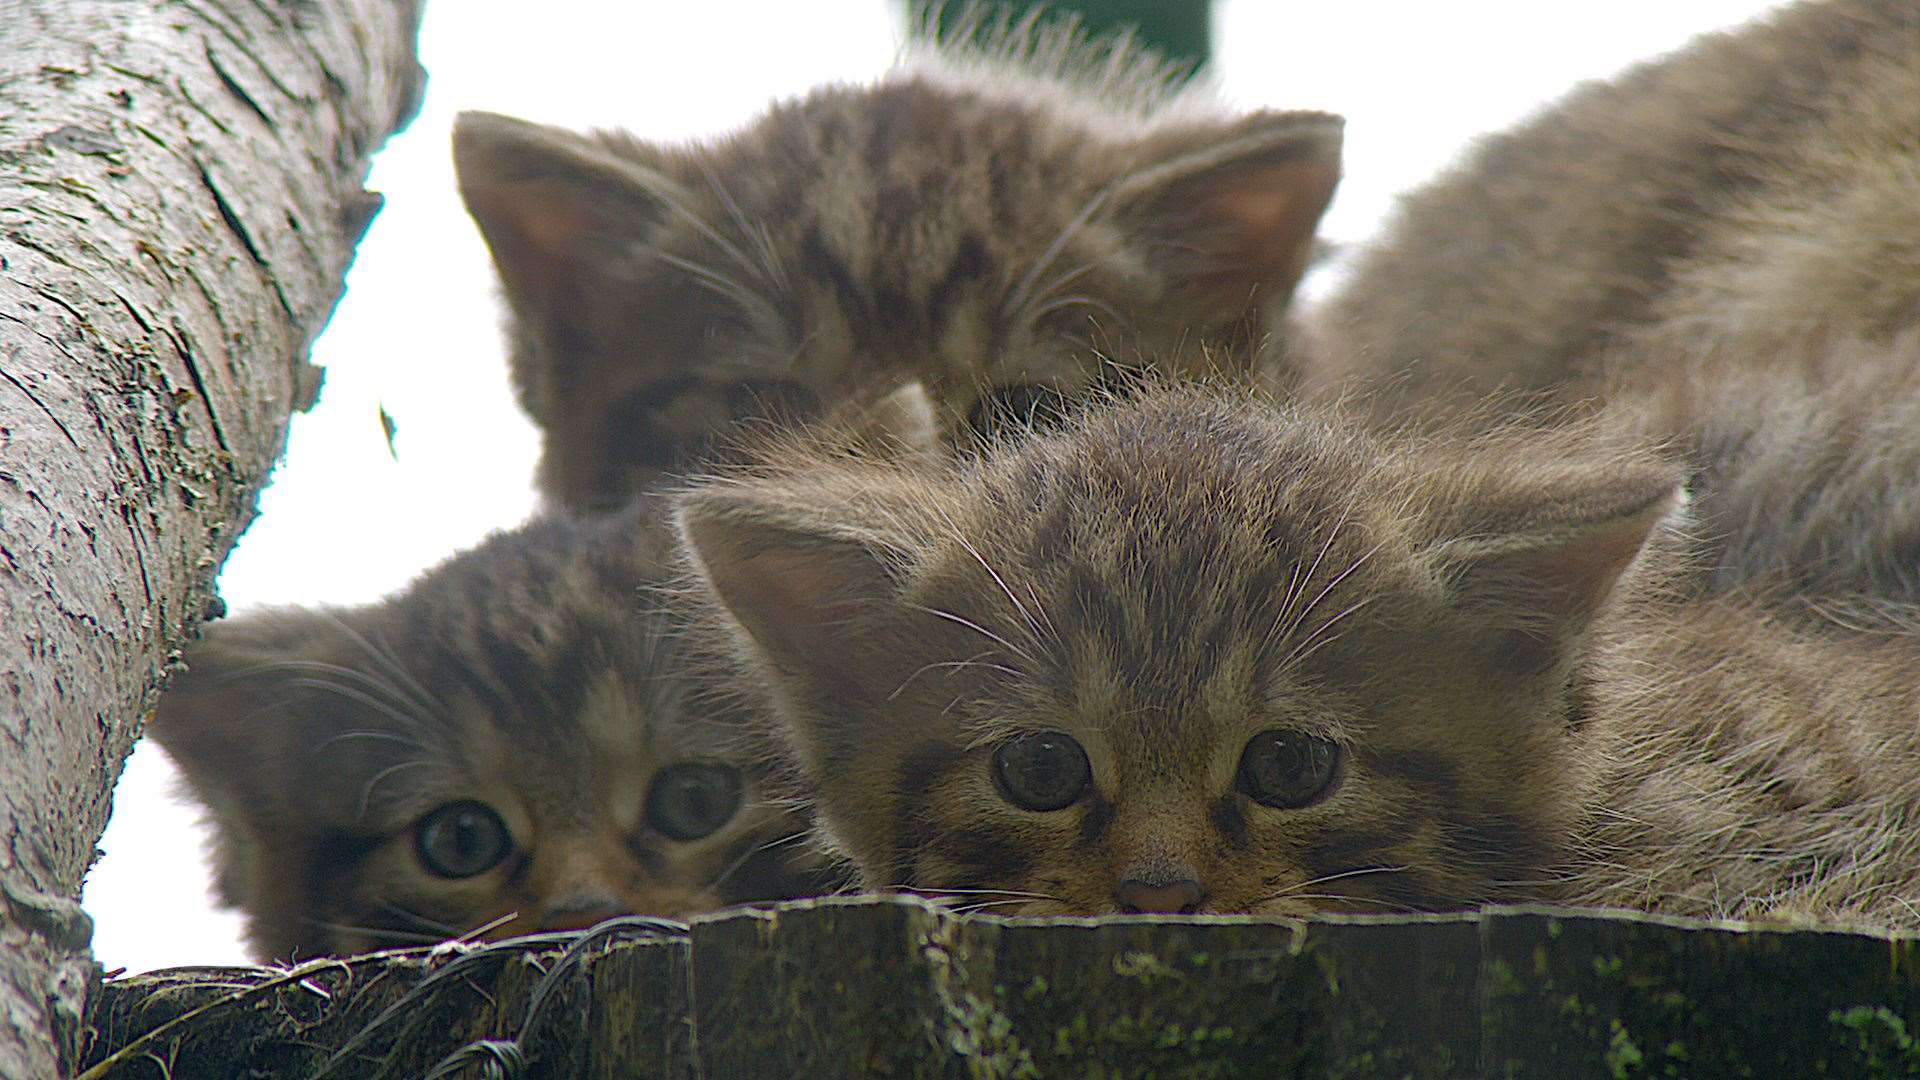 There are hopes that wildcat kittens to be breed at the site could be released as early as next year. Photo: Saving Wildcats